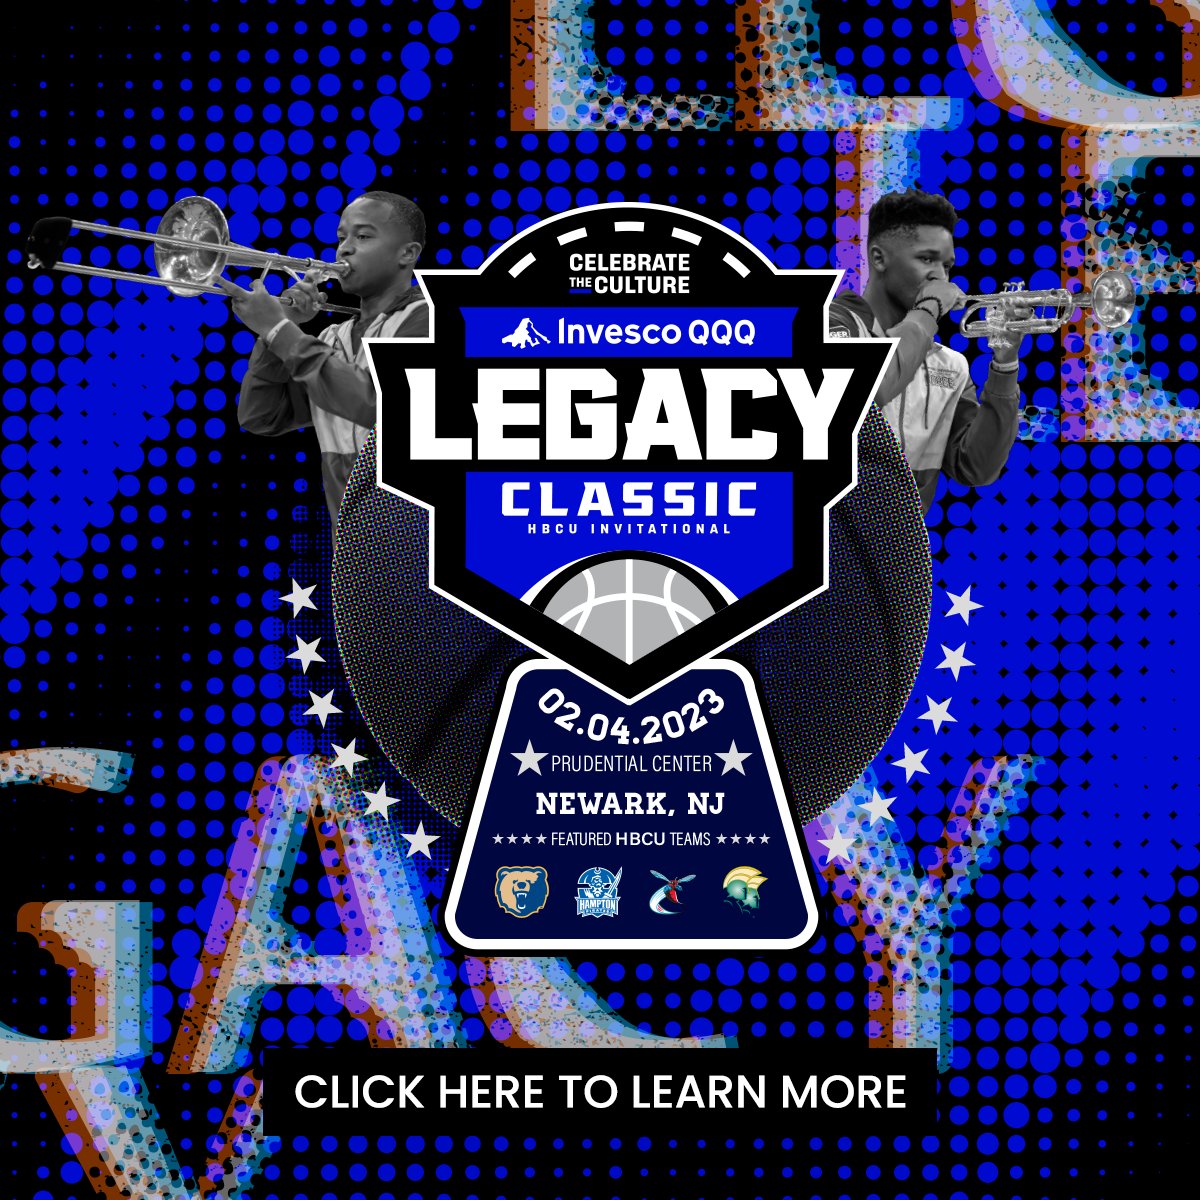 Don't miss the @legacyclassic at Prudential Center on Saturday, February 4th. As a valued #HBCU fan, enjoy this 50% discount off select tickets when you enter code 'HBCUNY'! 🎟️: bit.ly/3H7UYfw